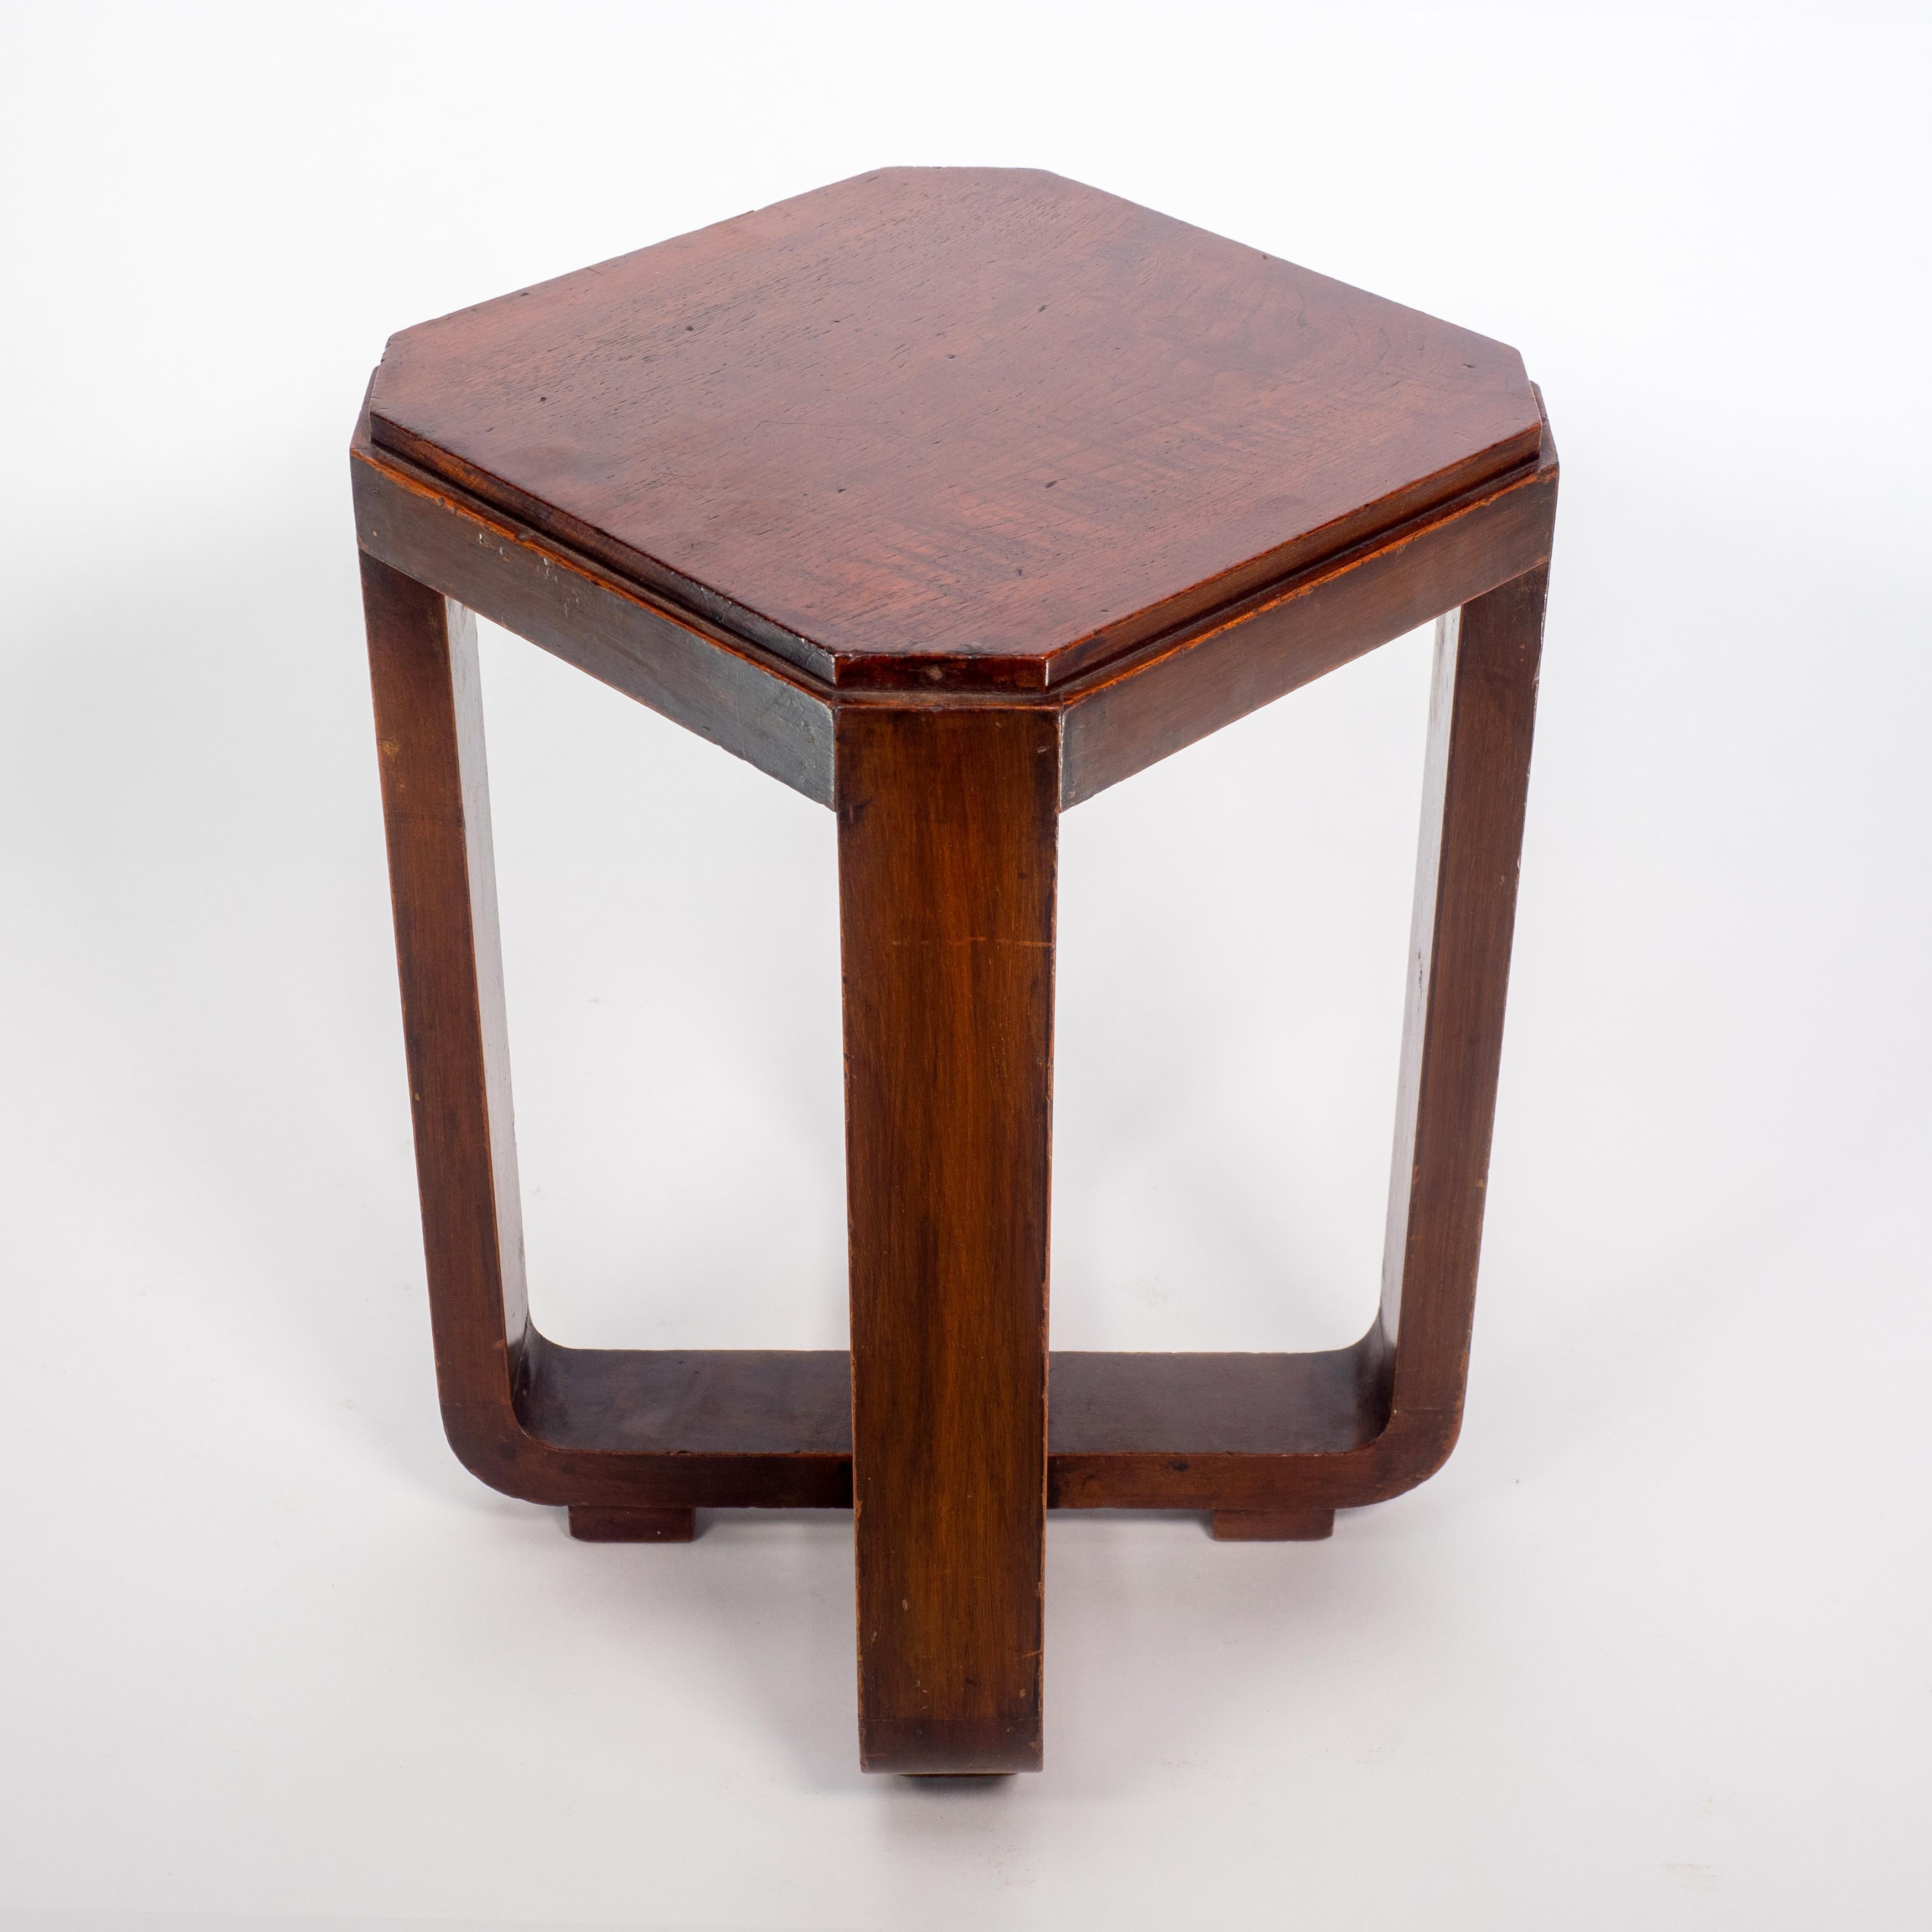 A little Art Deco Walnut side table, the legs follow down then through to a cross stretcher that laps in the center on little square block feet.